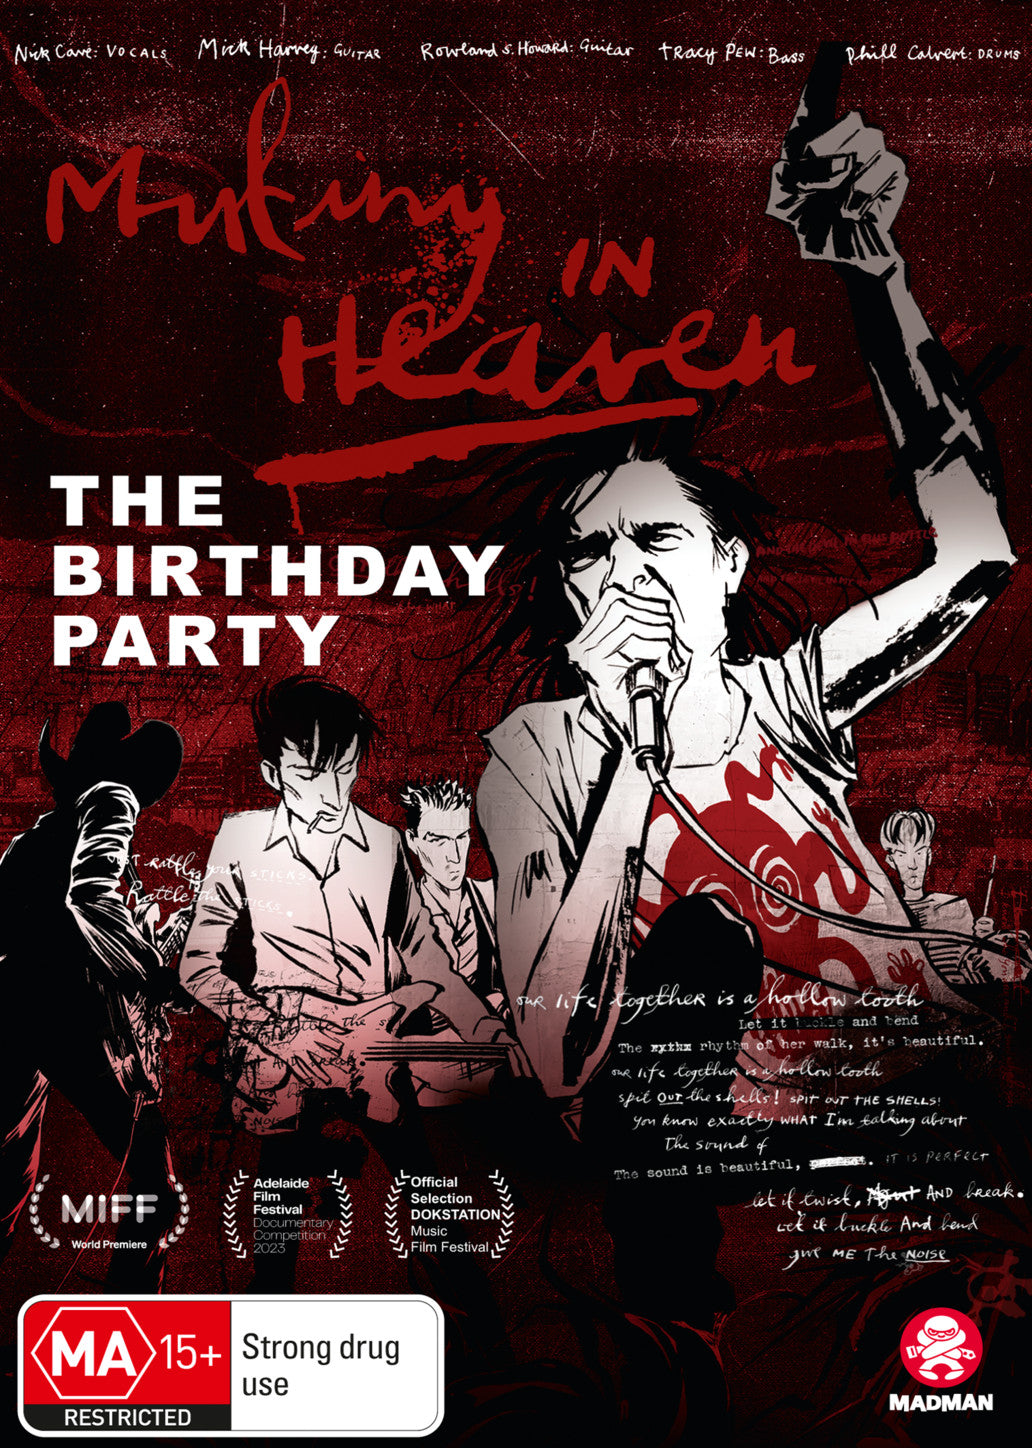 MUTINY IN HEAVEN: THE BIRTHDAY PARTY